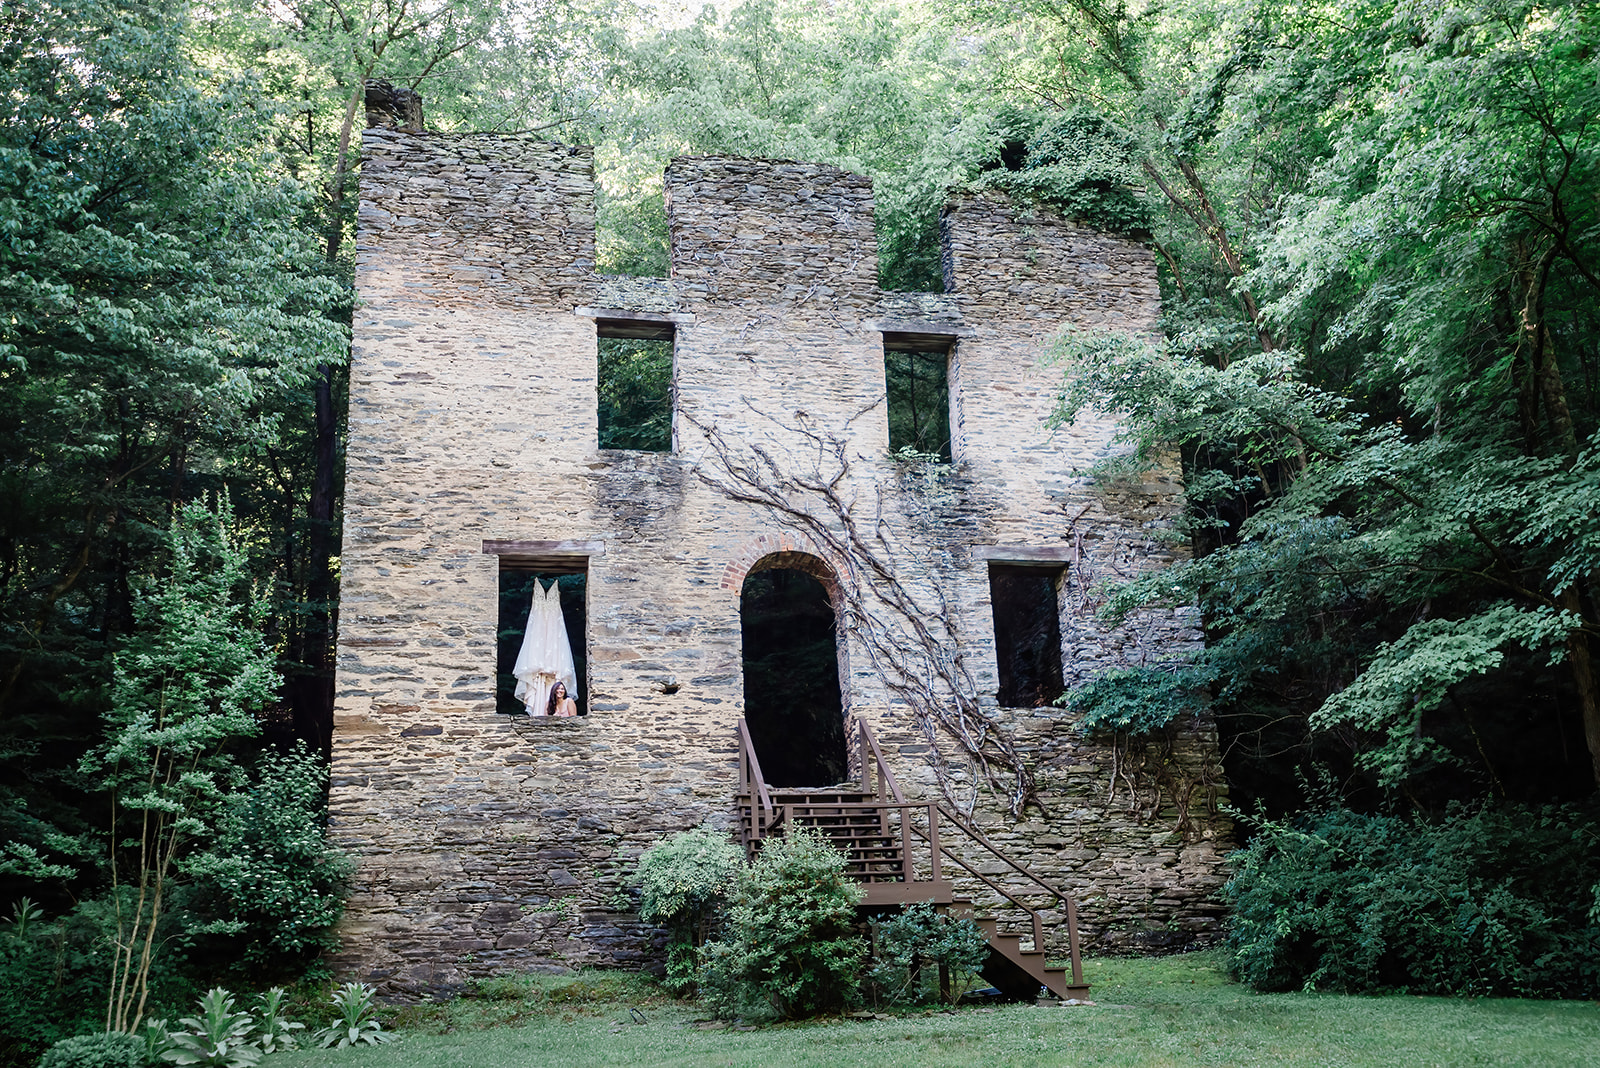 This is a picture of a wedding dress hanging from the window of an abandoned castle in the woods.